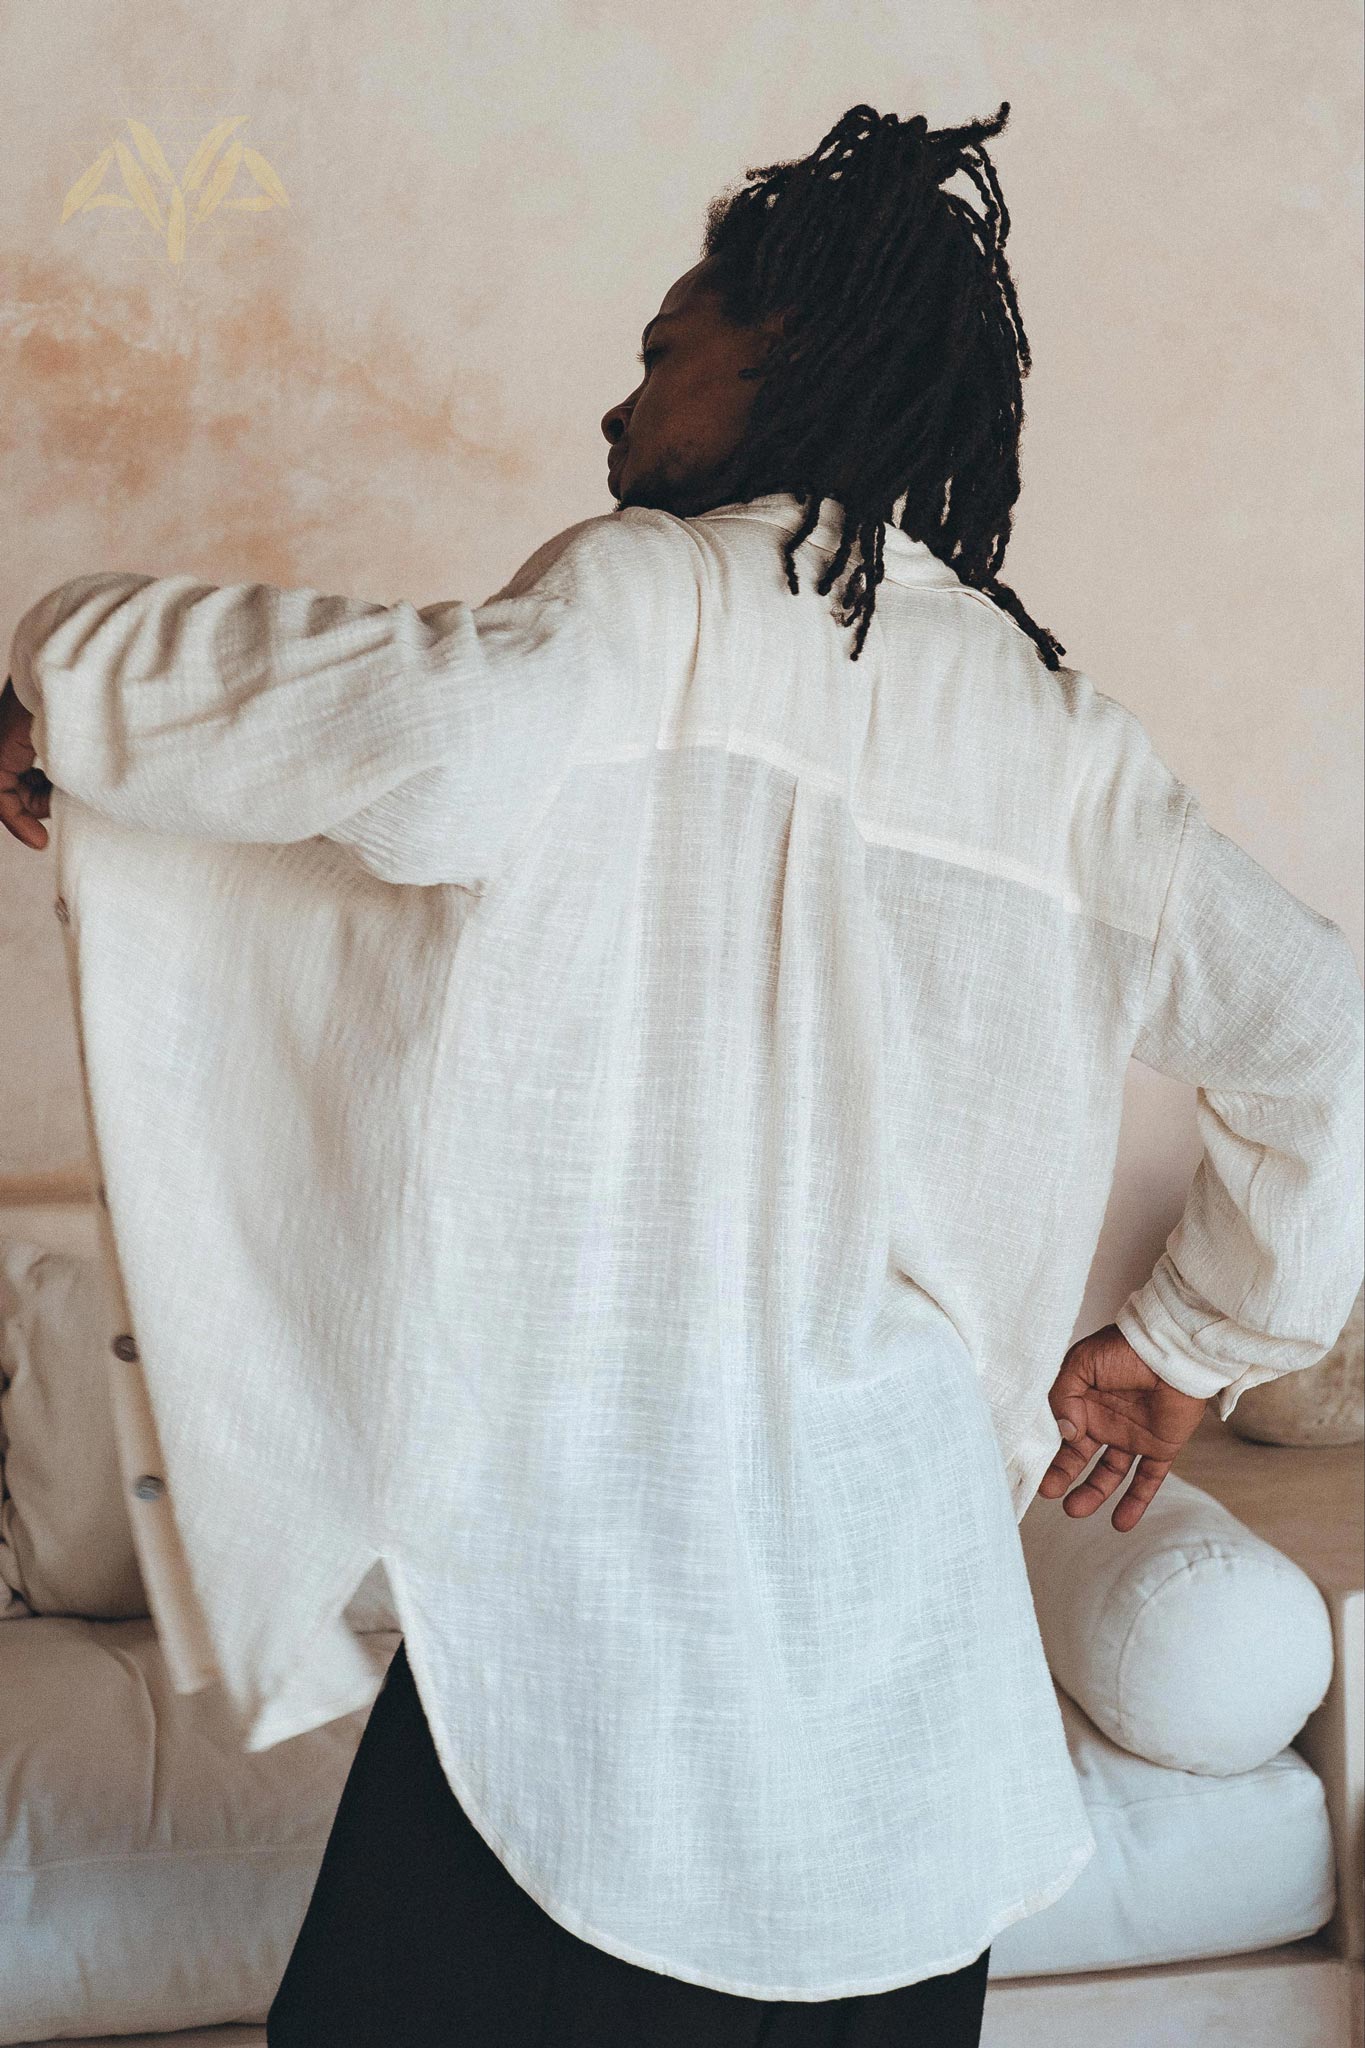 Off-White Handwoven Cotton Oversized Shirt for Men by AYA Sacred Wear